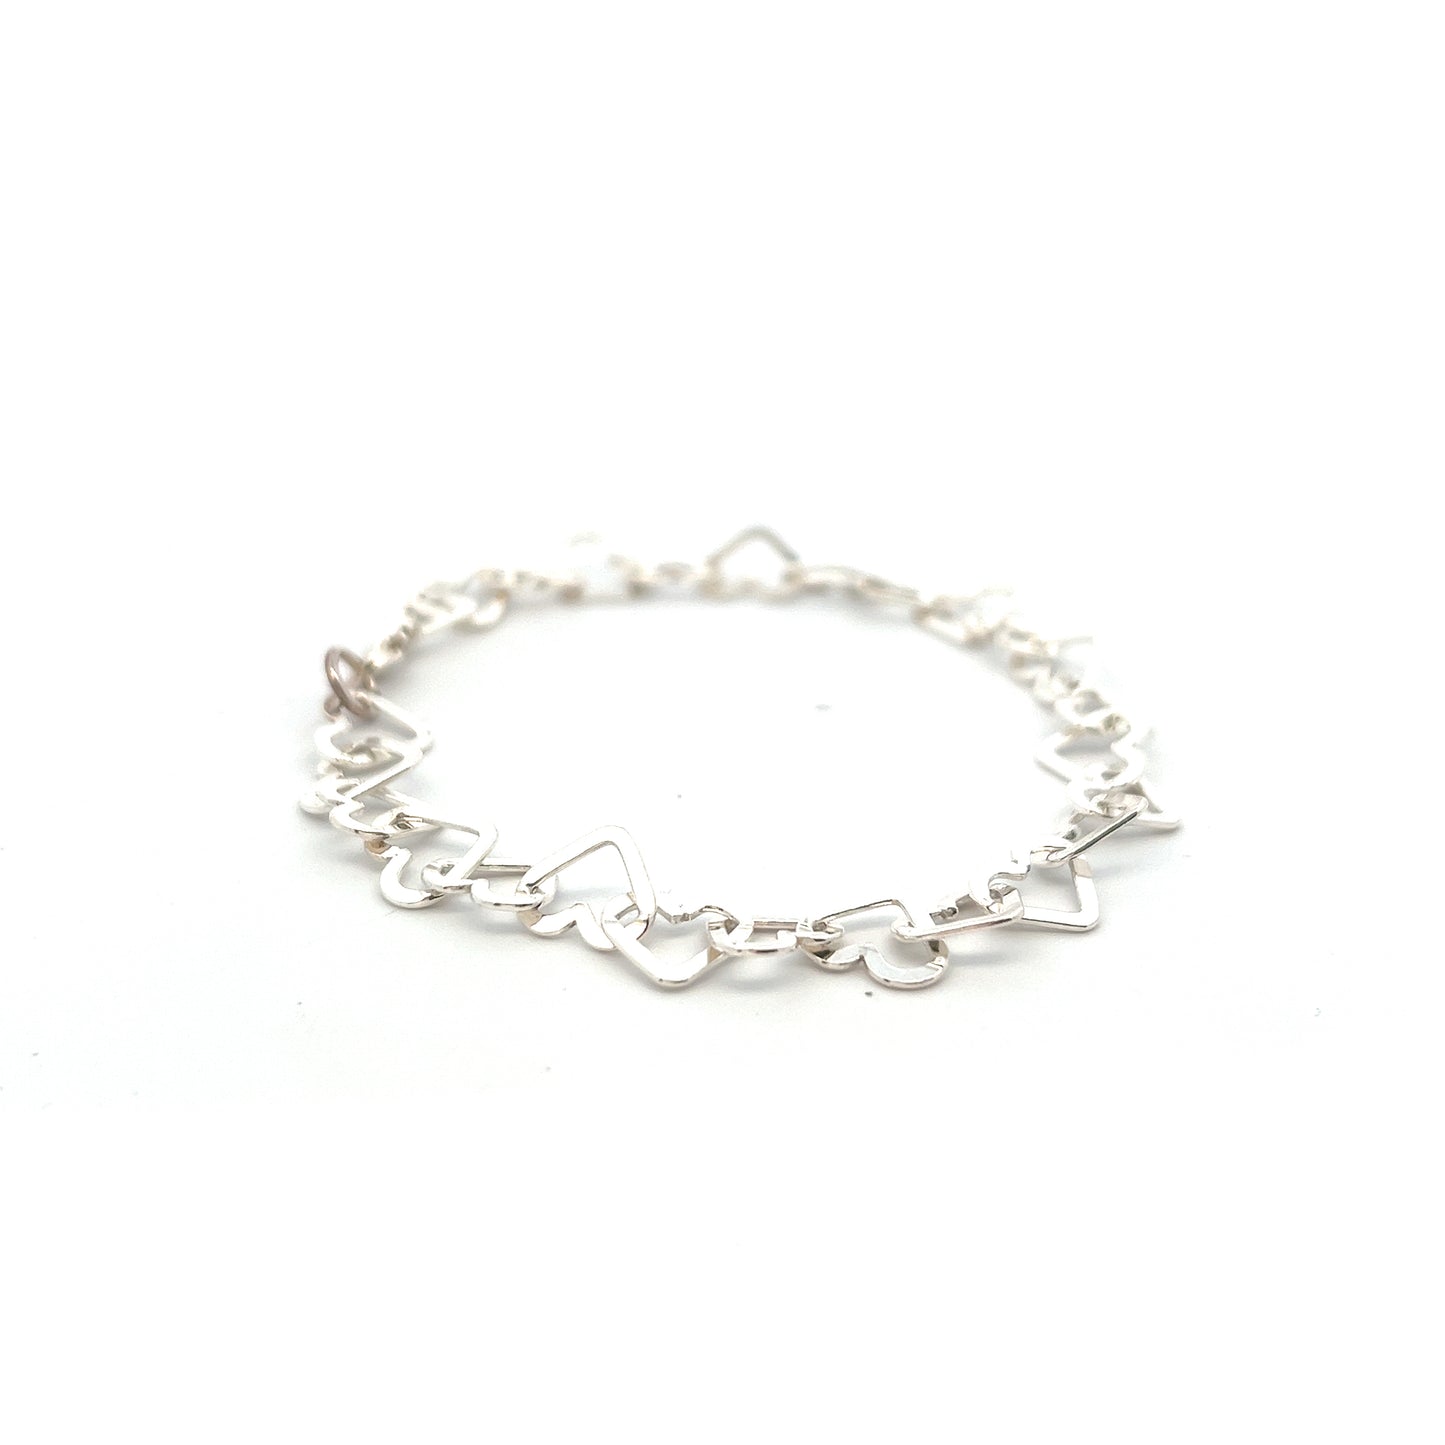 Pre-Owned Open Hearts Bracelet Stamped 925